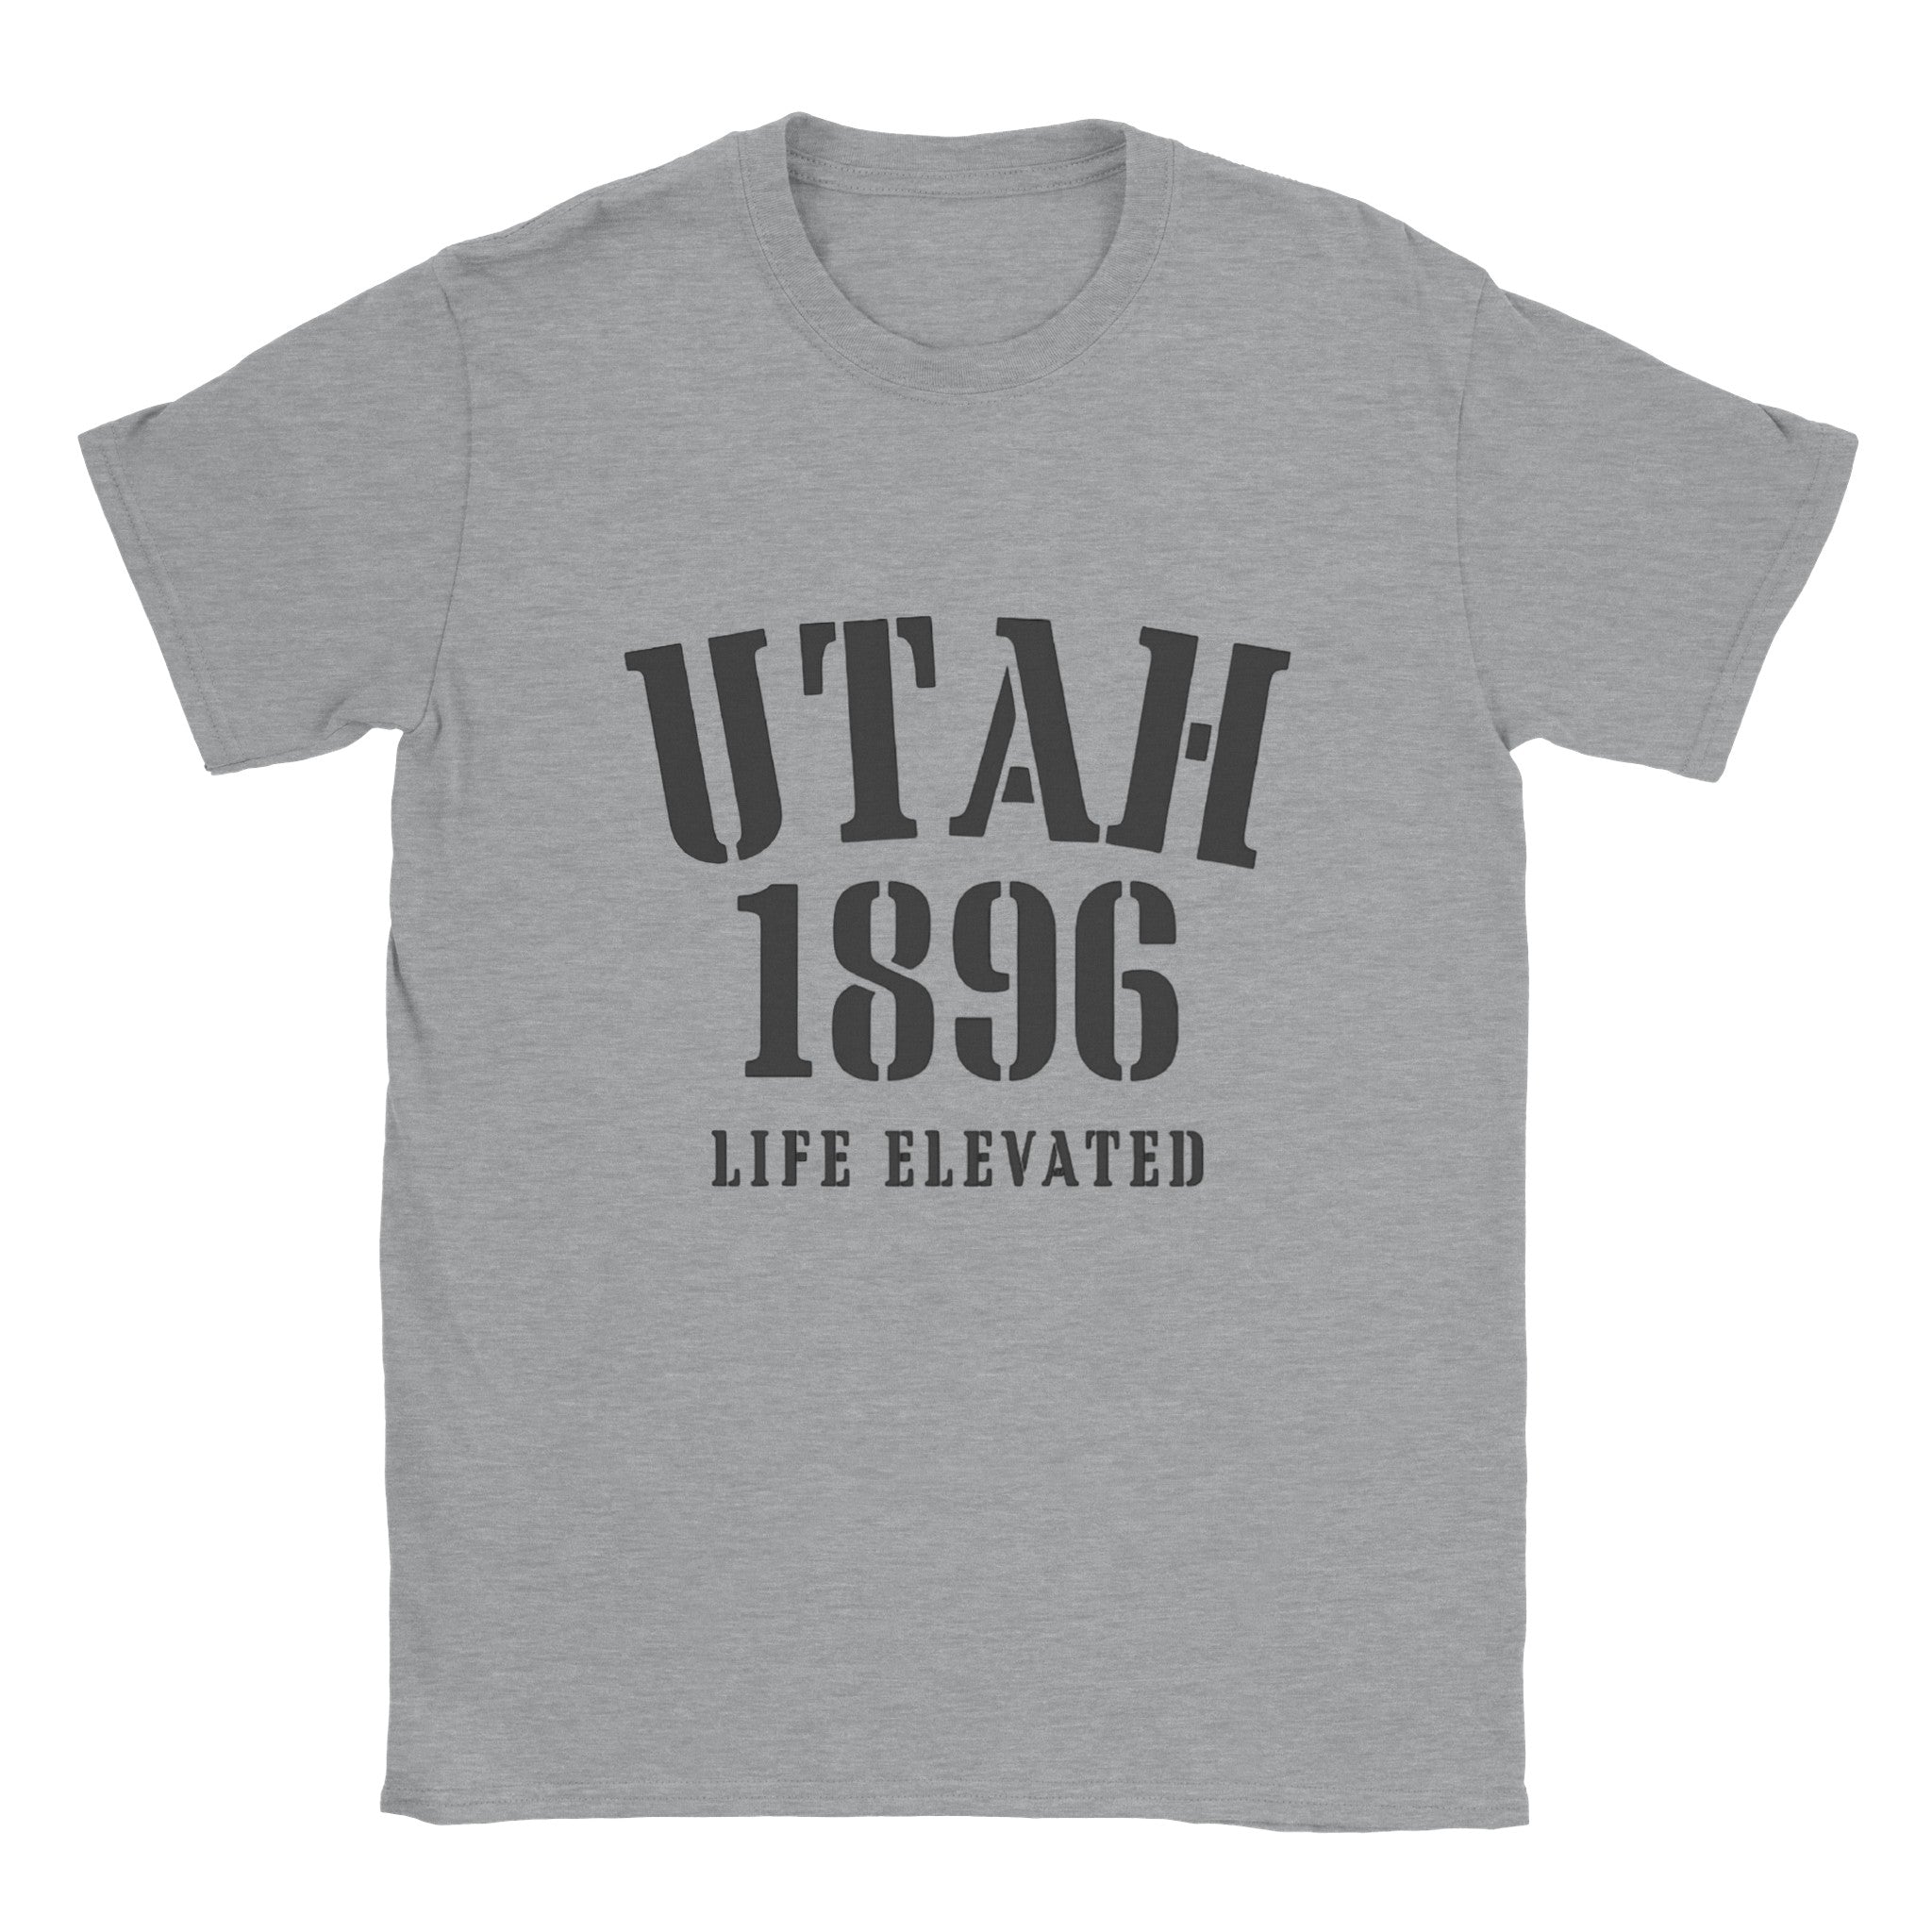 Utah- Classic Unisex Crewneck States T-shirt - Creations by Chris and Carlos